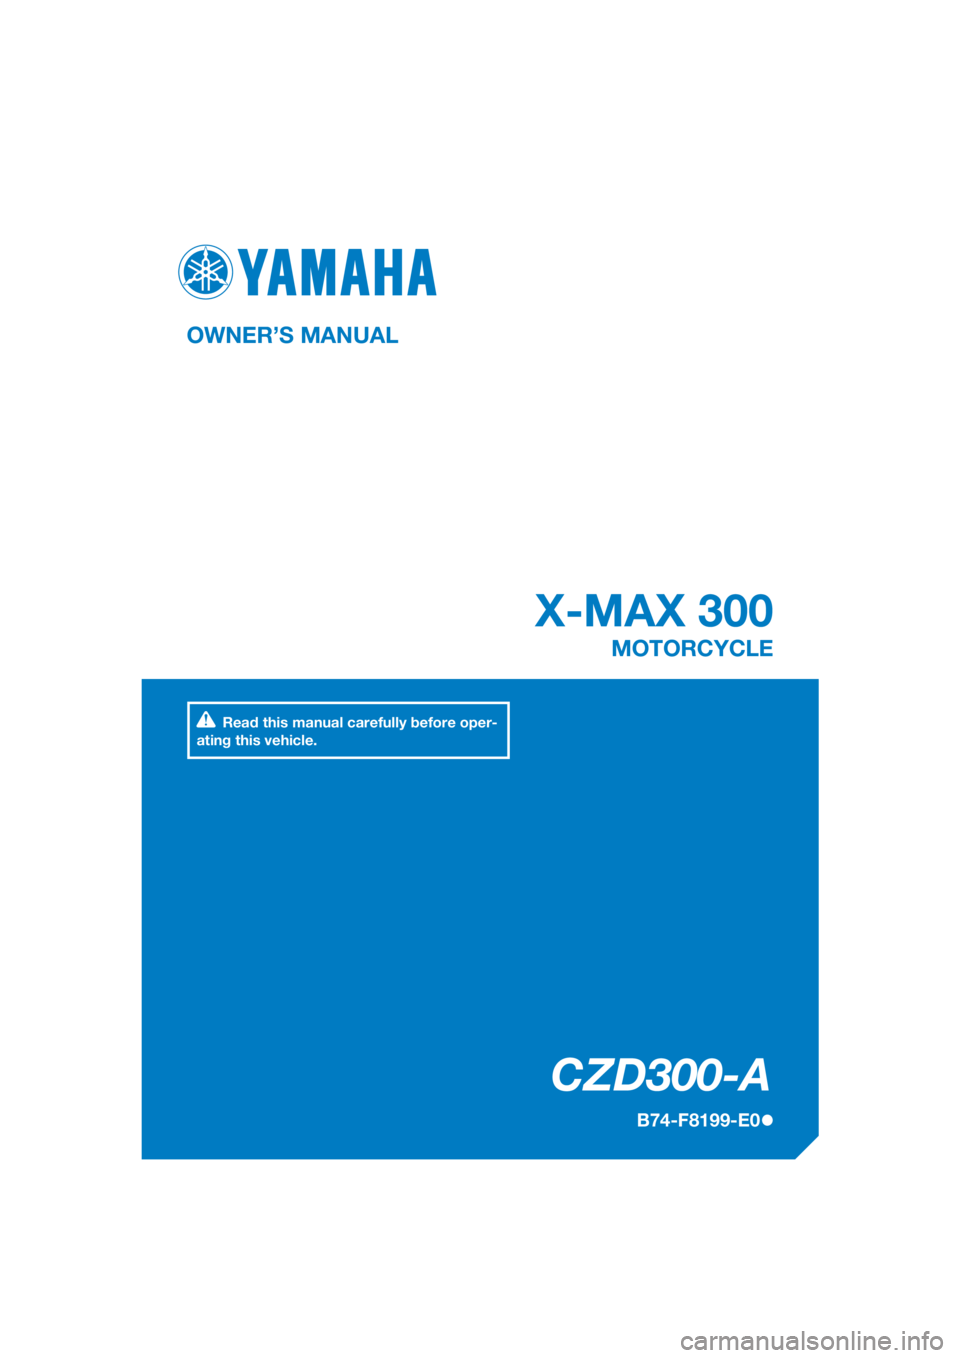 YAMAHA XMAX 300 2017  Owners Manual DIC183
CZD300-A
X-MAX 300
OWNER’S MANUAL
B74-F8199-E0
MOTORCYCLE
[English  (E)]
Read this manual carefully before oper-
ating this vehicle. 